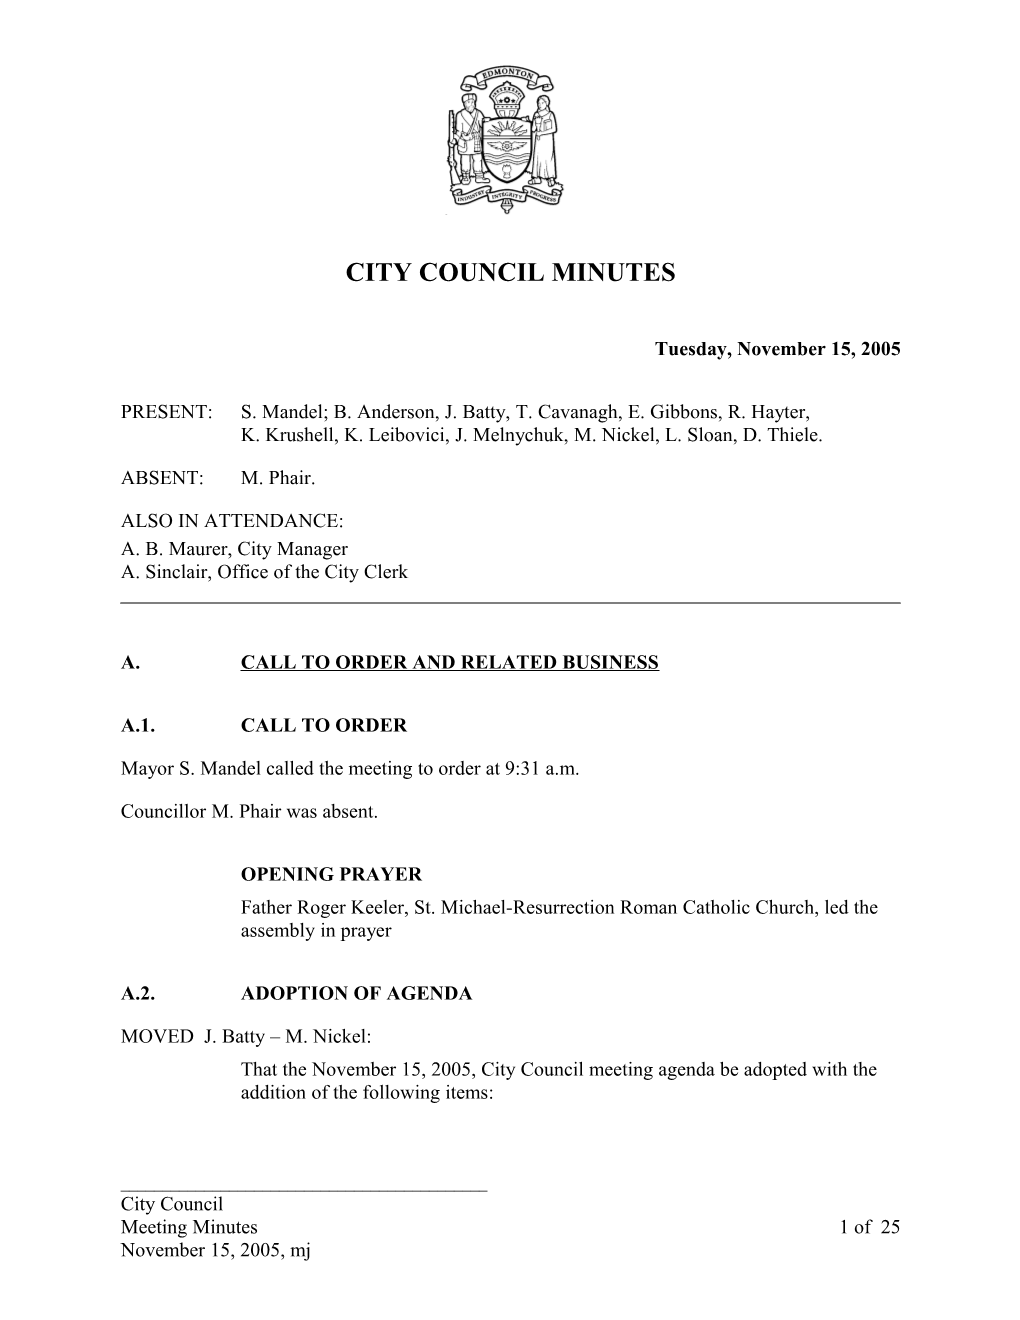 Minutes for City Council November 15, 2005 Meeting